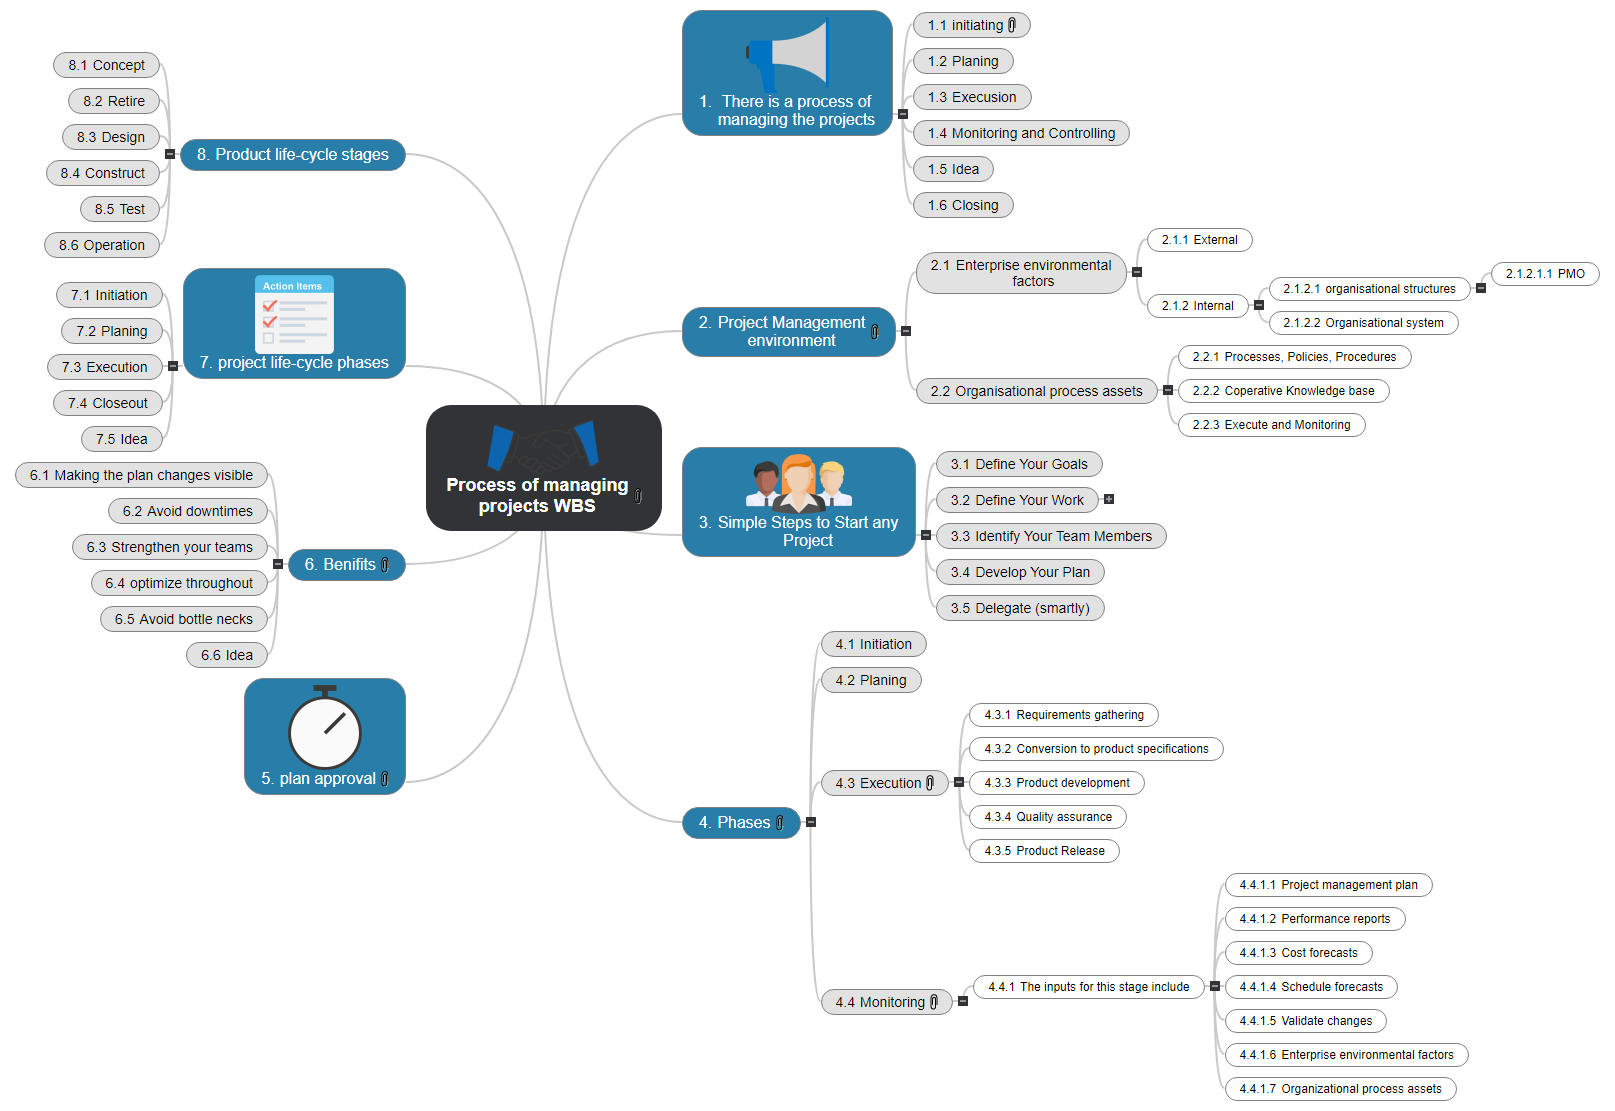 Process of managing projects WBS1 Mind Map